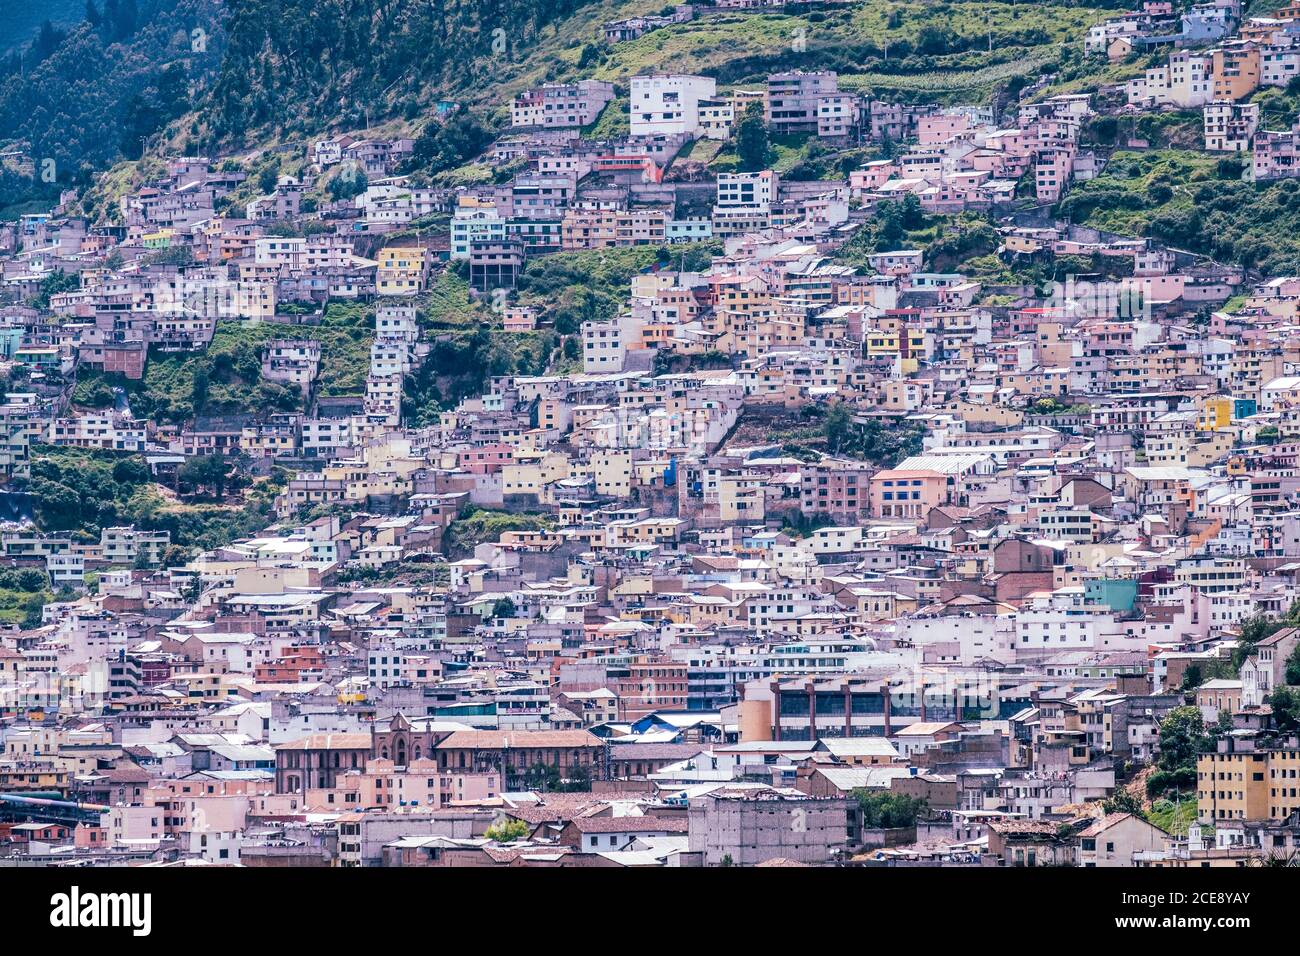 A view of the densely populated city of Quito. Stock Photo